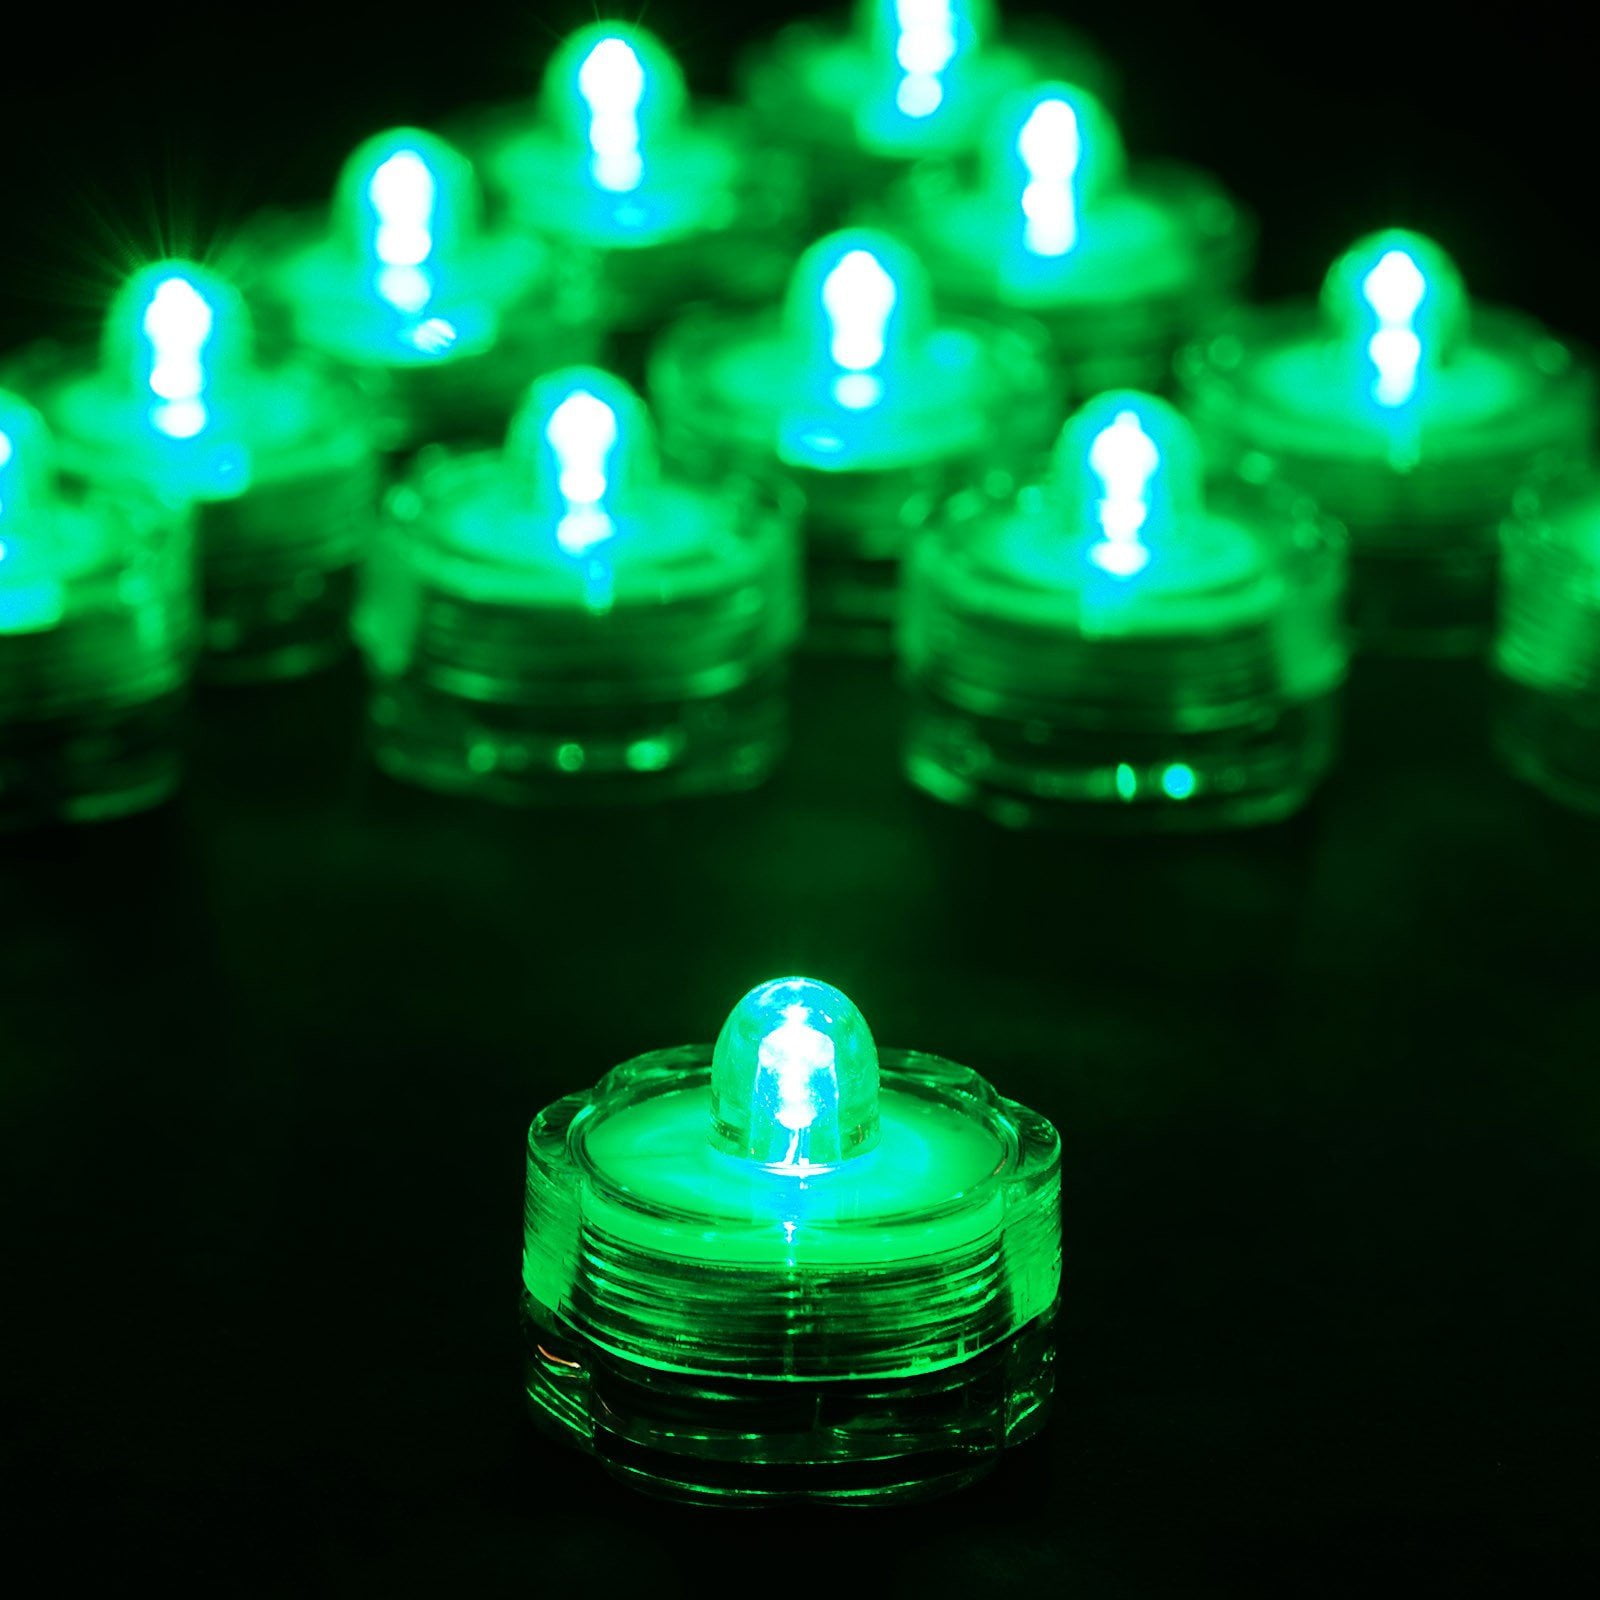 COLOR CHANGING LED Submersible Tea Lights for Wedding Centerpiece ! 12 